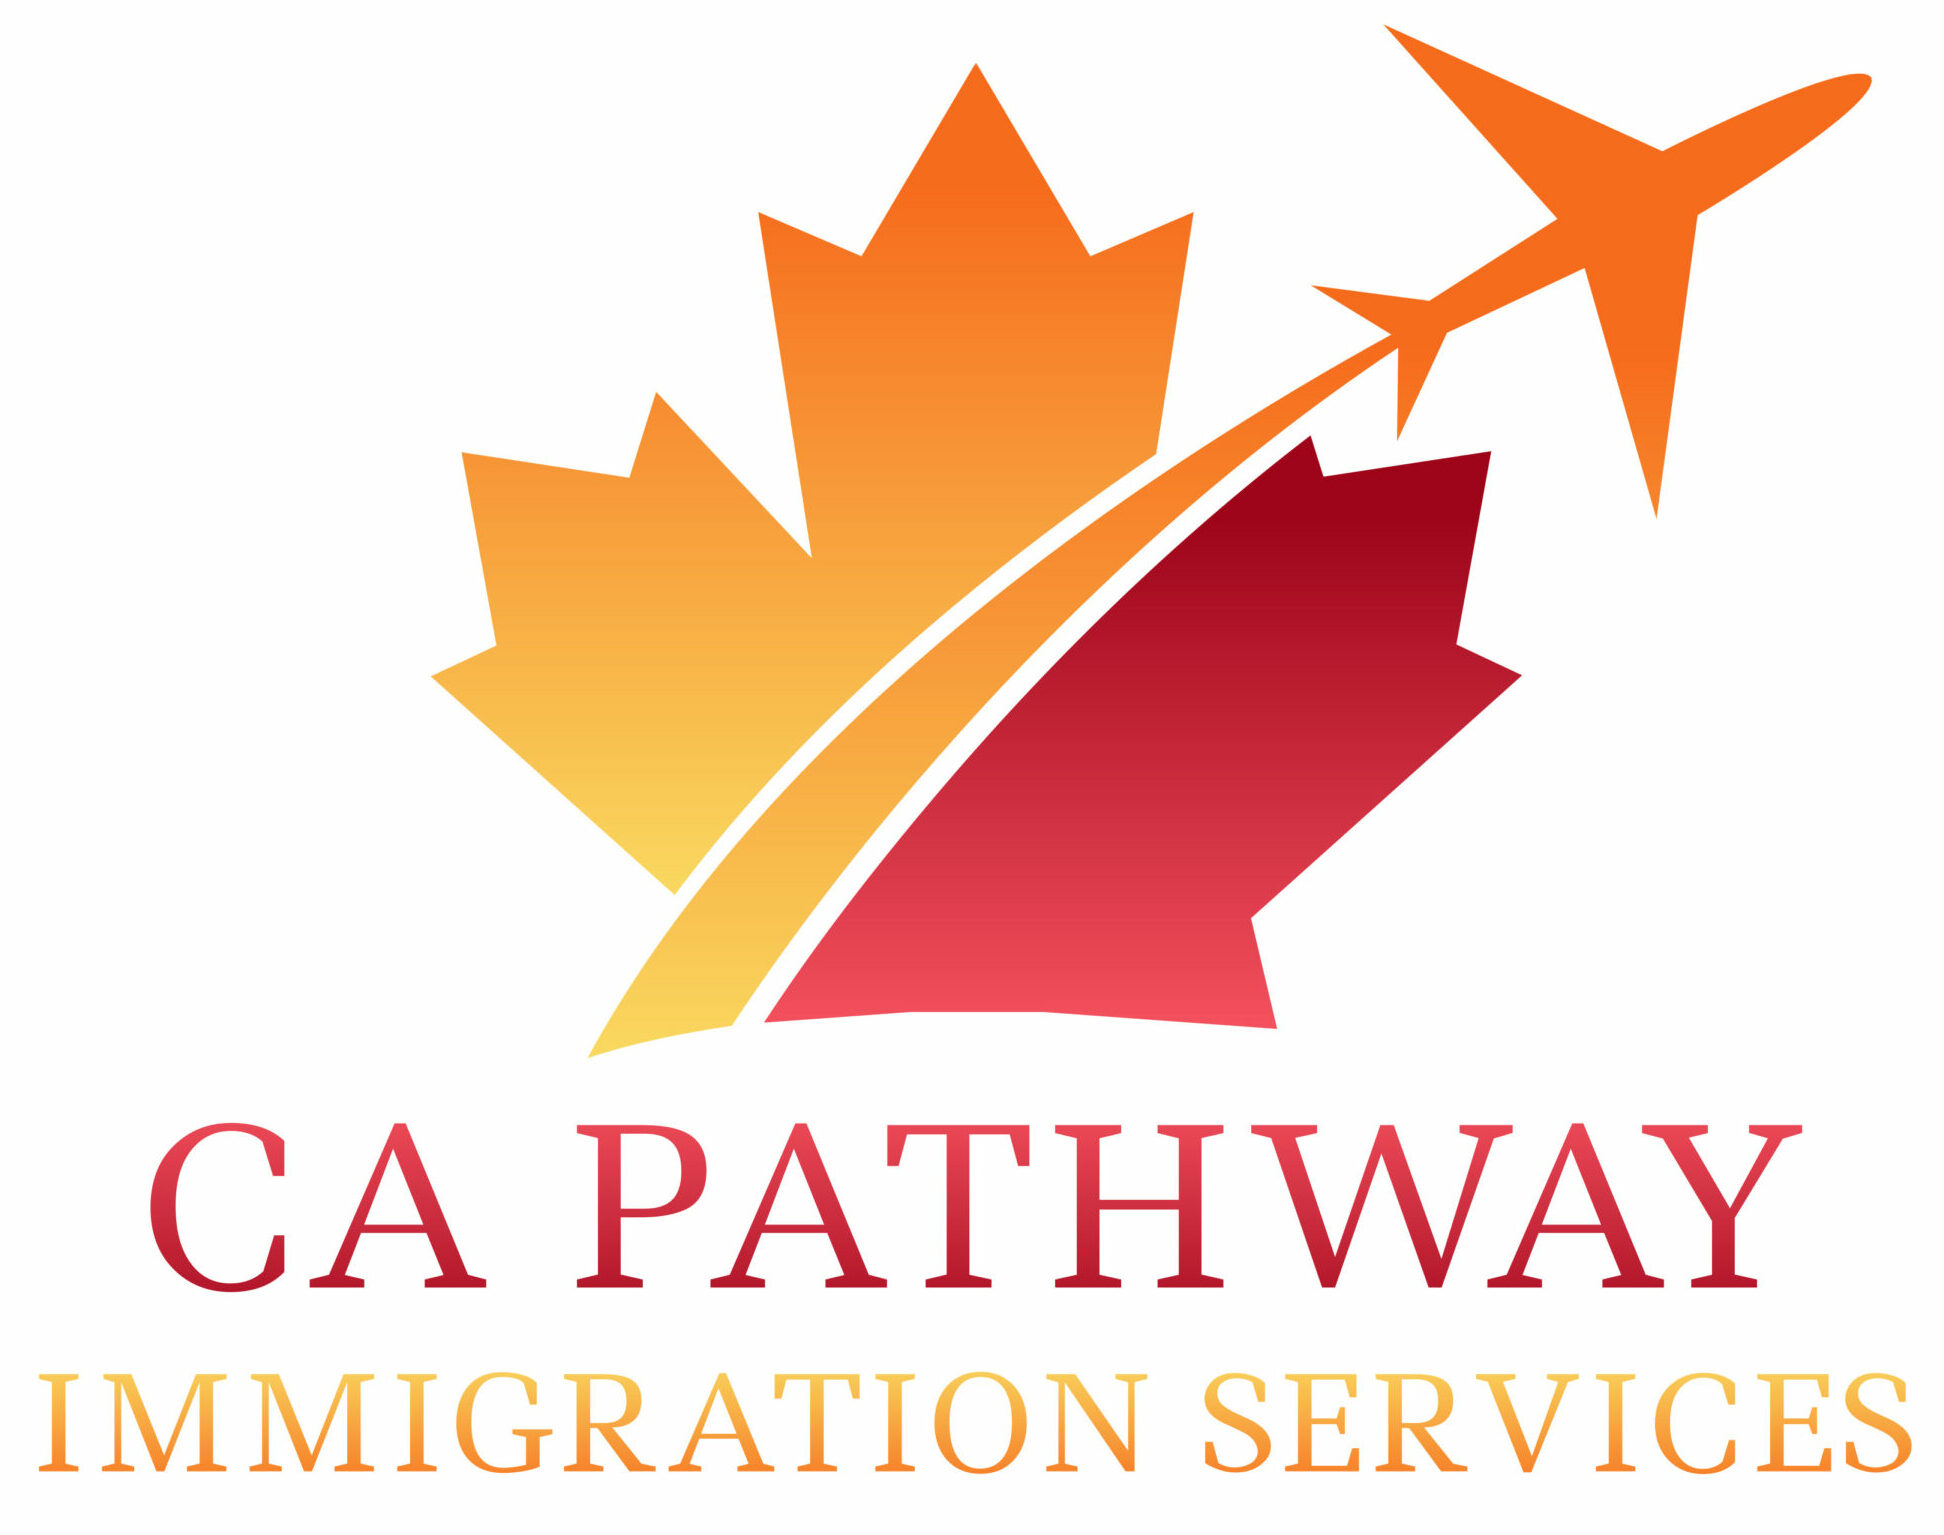 CA Pathway Immigration Services